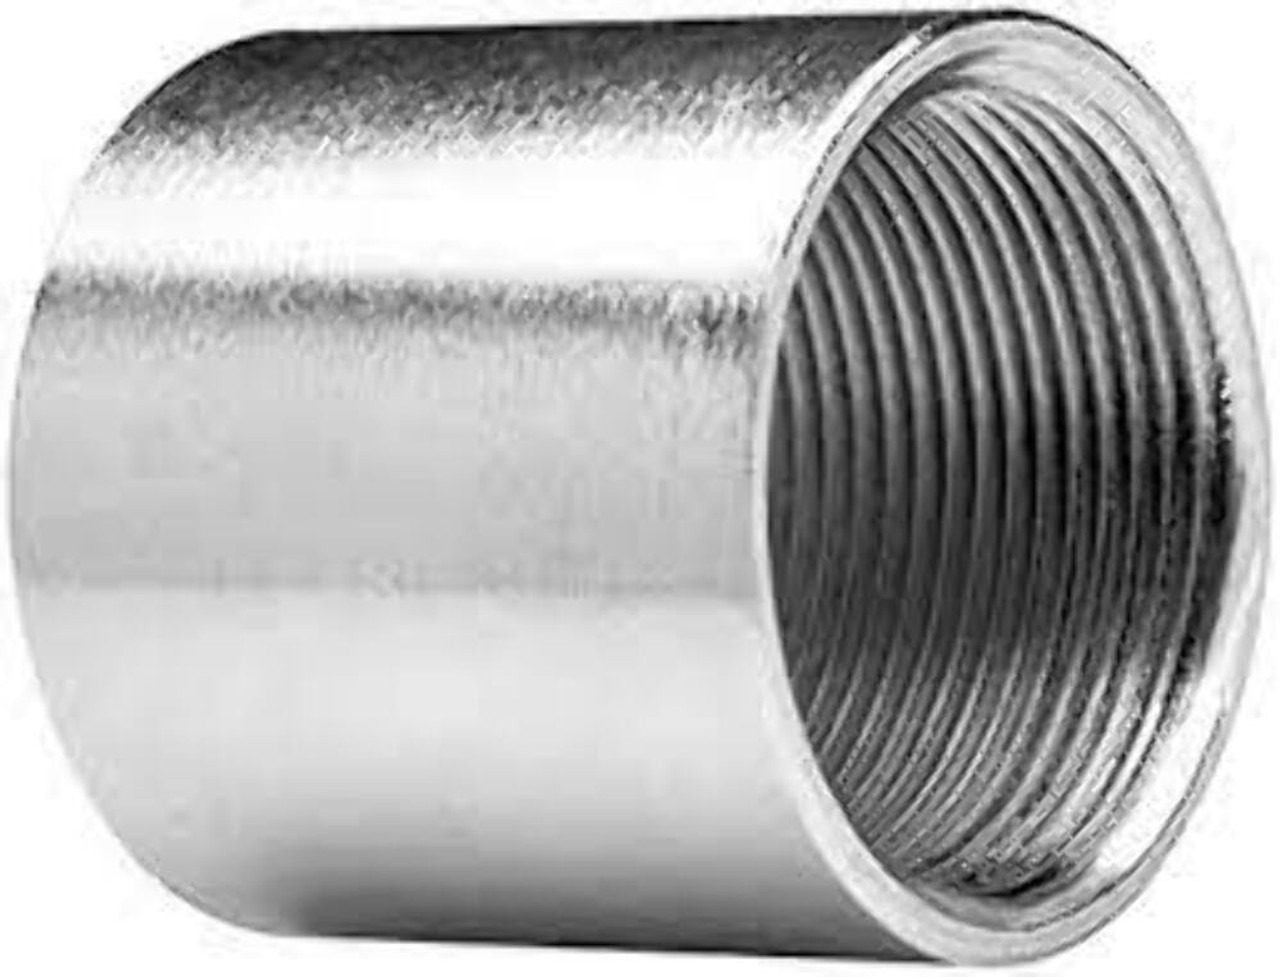 Garvin RC-250 Conduit Threaded Galvanized Coupling Material Steel Size: 2-1/2 Inches.